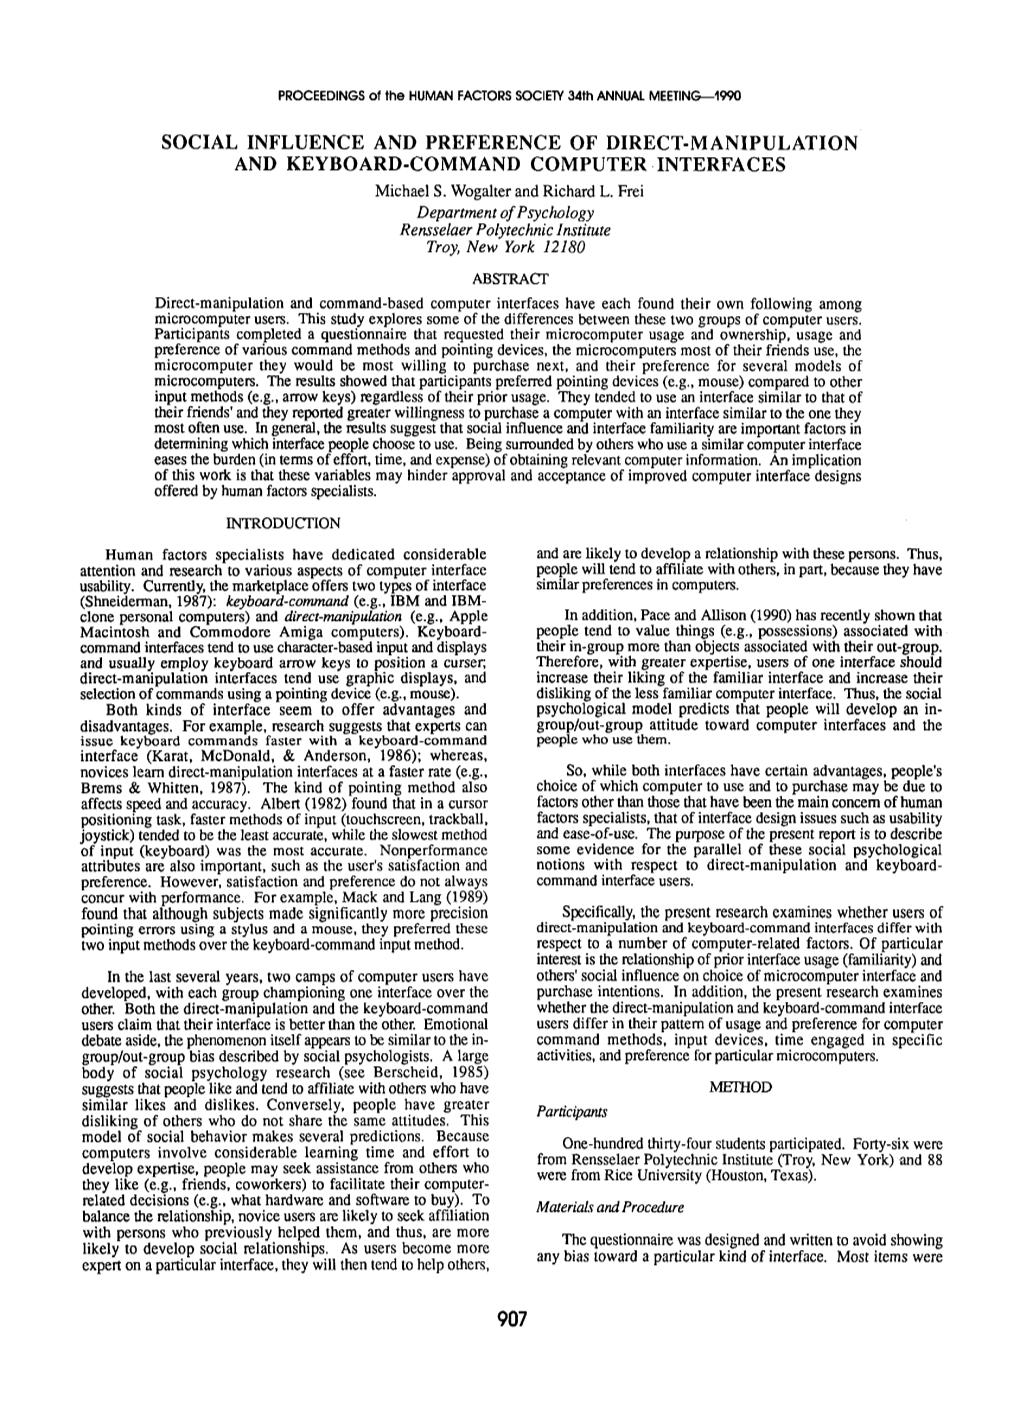 SOCIAL INFLUENCE and PREFERENCE of DIRECT-MANIPULATION and KEYBOARD-COMMAND COMPUTER INTERFACES Michael S